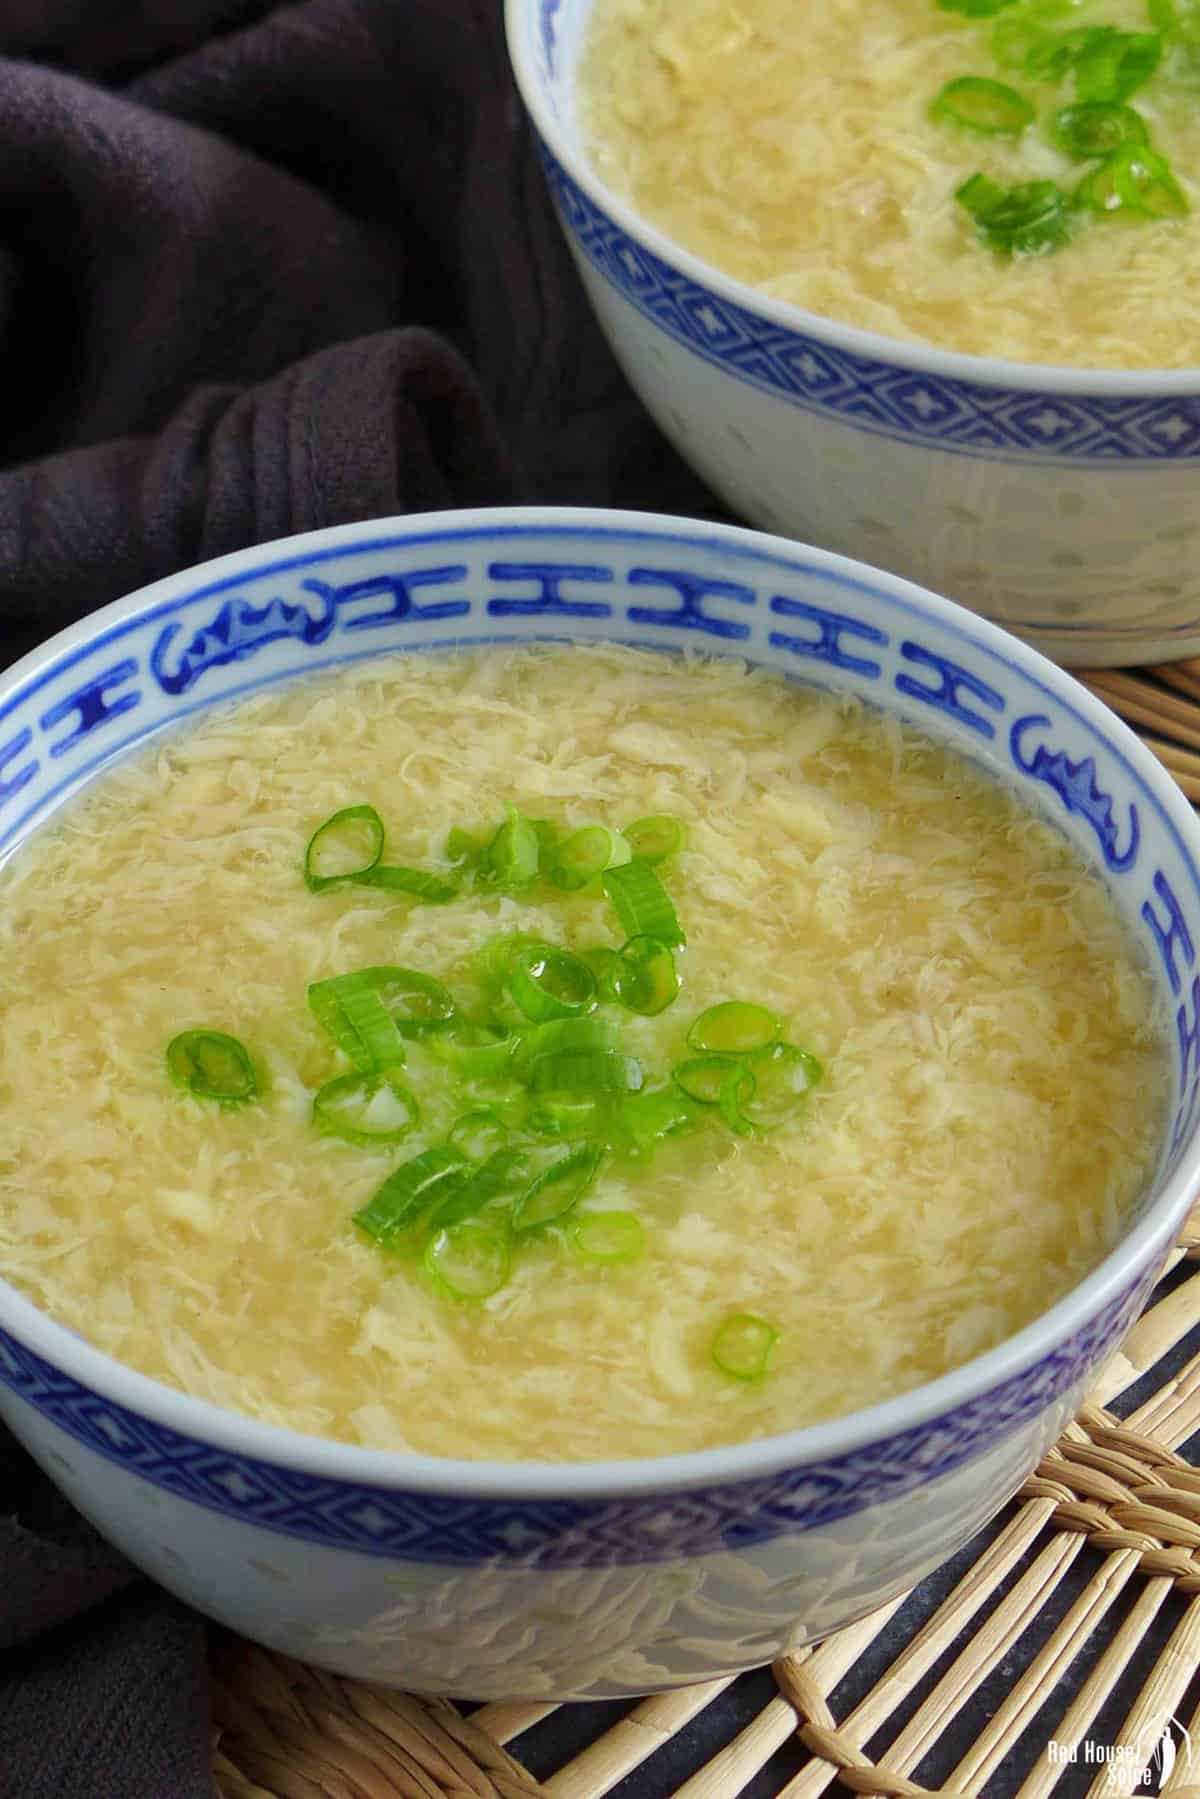 Soup with fine egg strands and scallions.